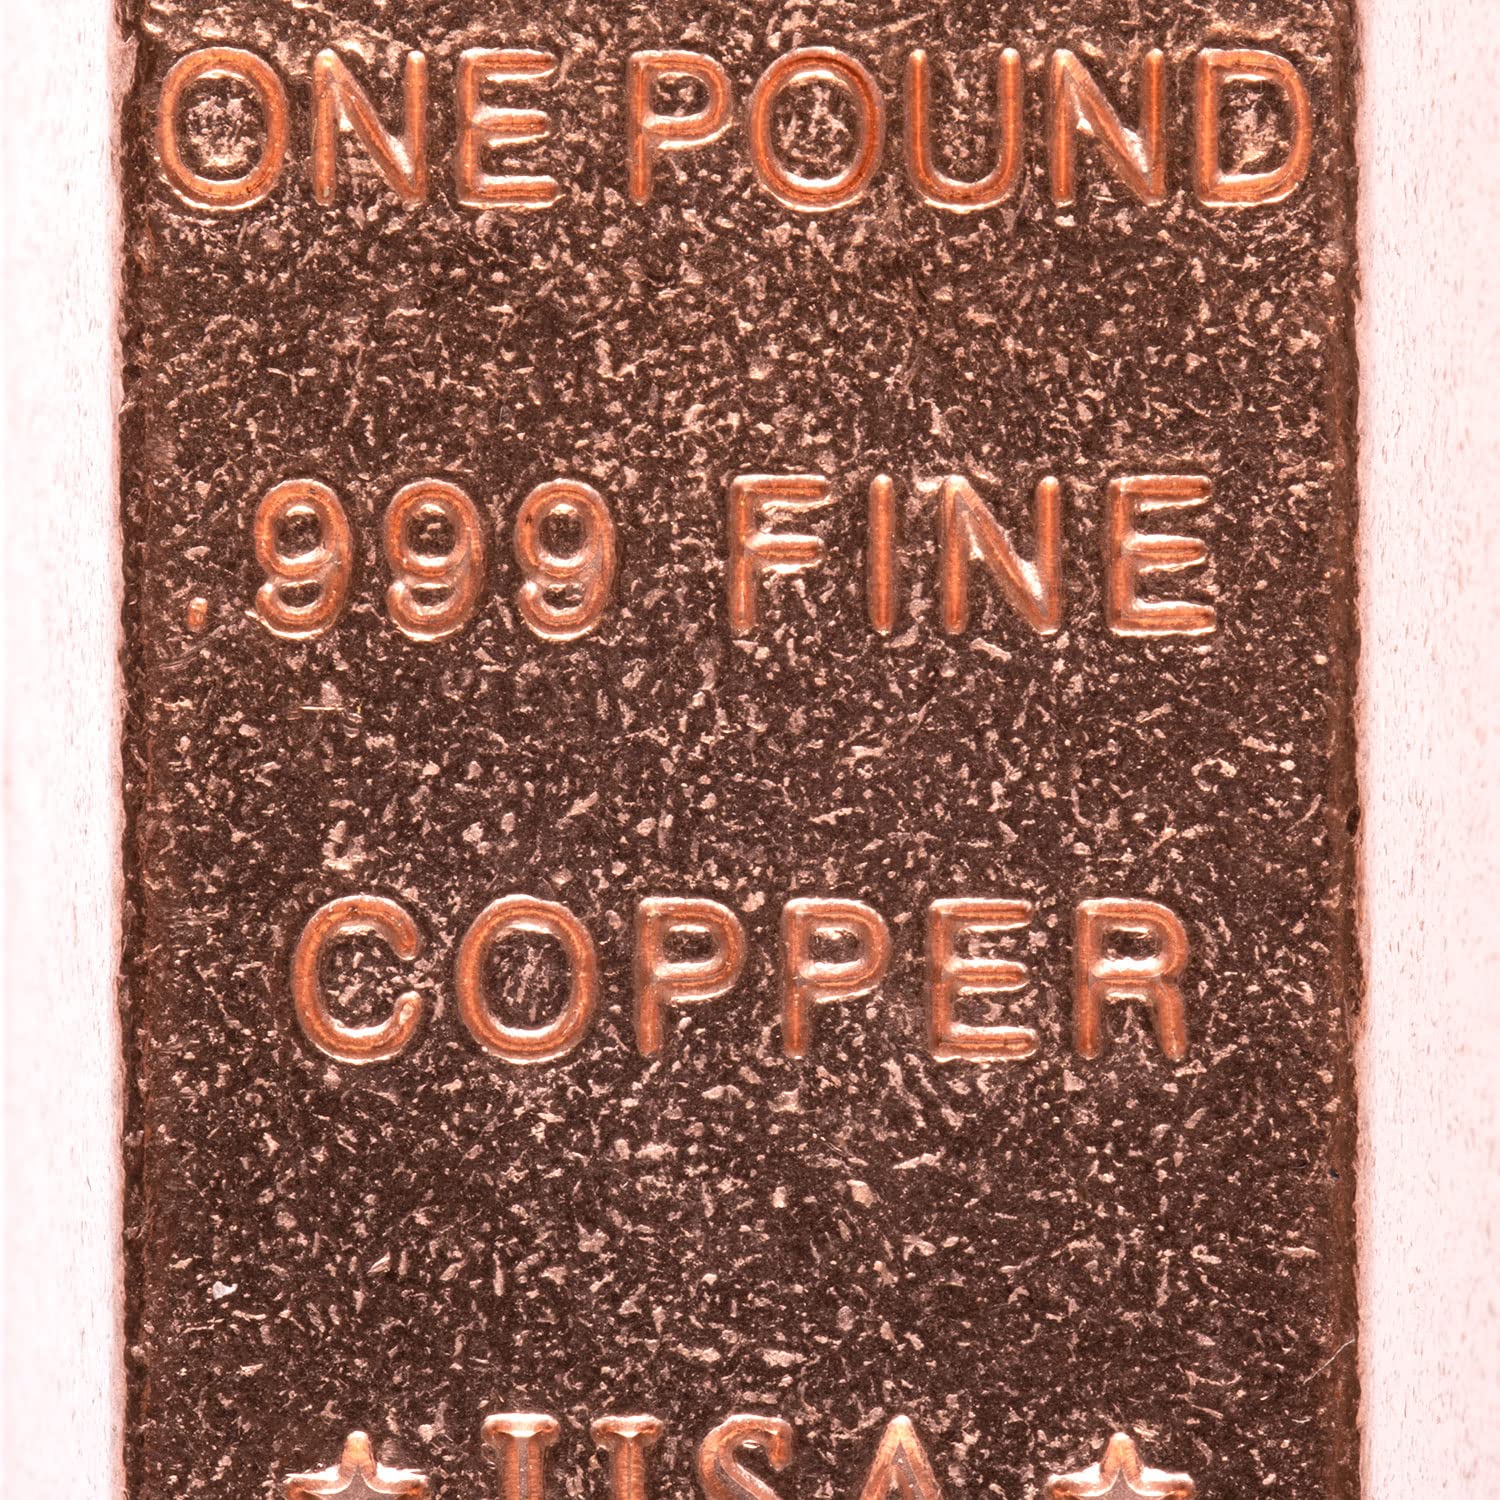 1 Pound Copper Bar Ingot Paperweight - 999 Pure Chemistry Element Design with Certificate of Authenticity by Unique Metals